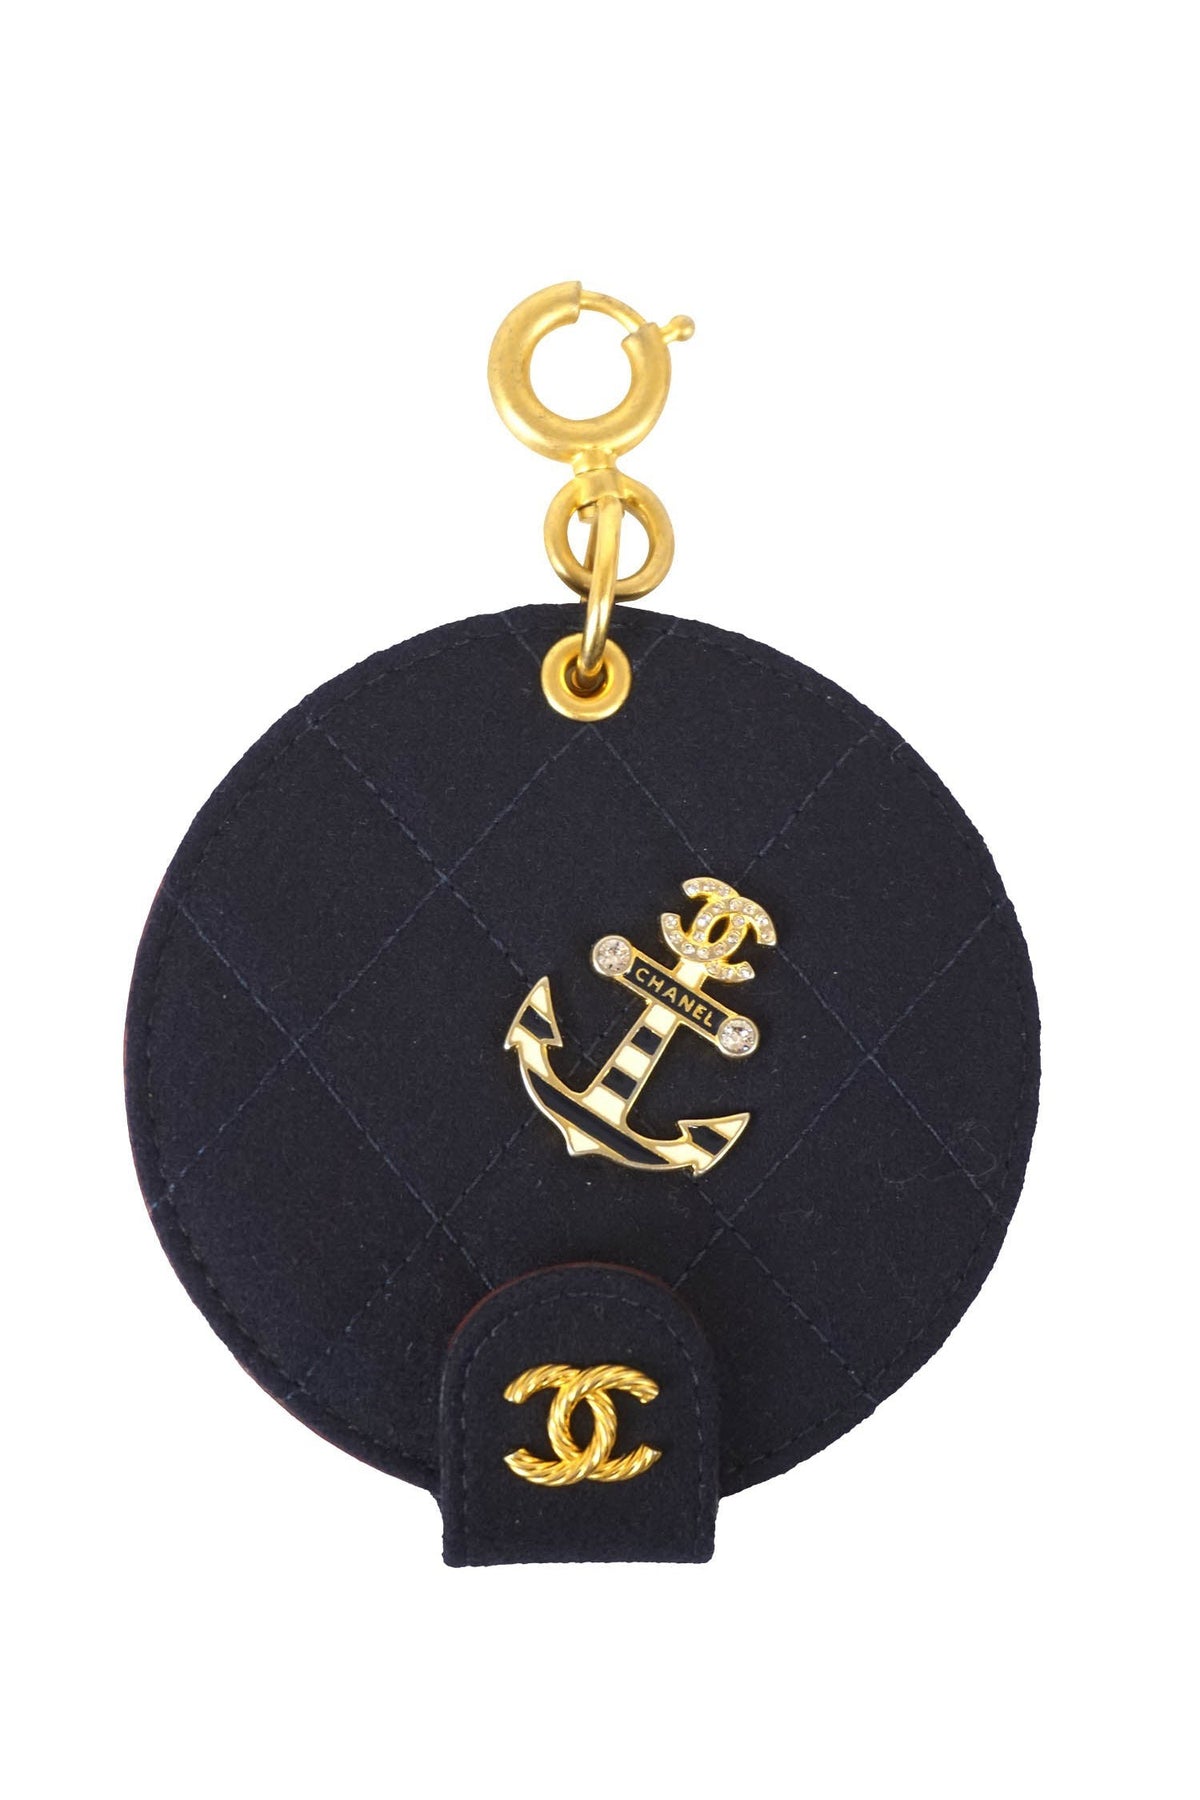 Chanel Vintage 1980's Hat Brooch | Foxy Couture Carmel